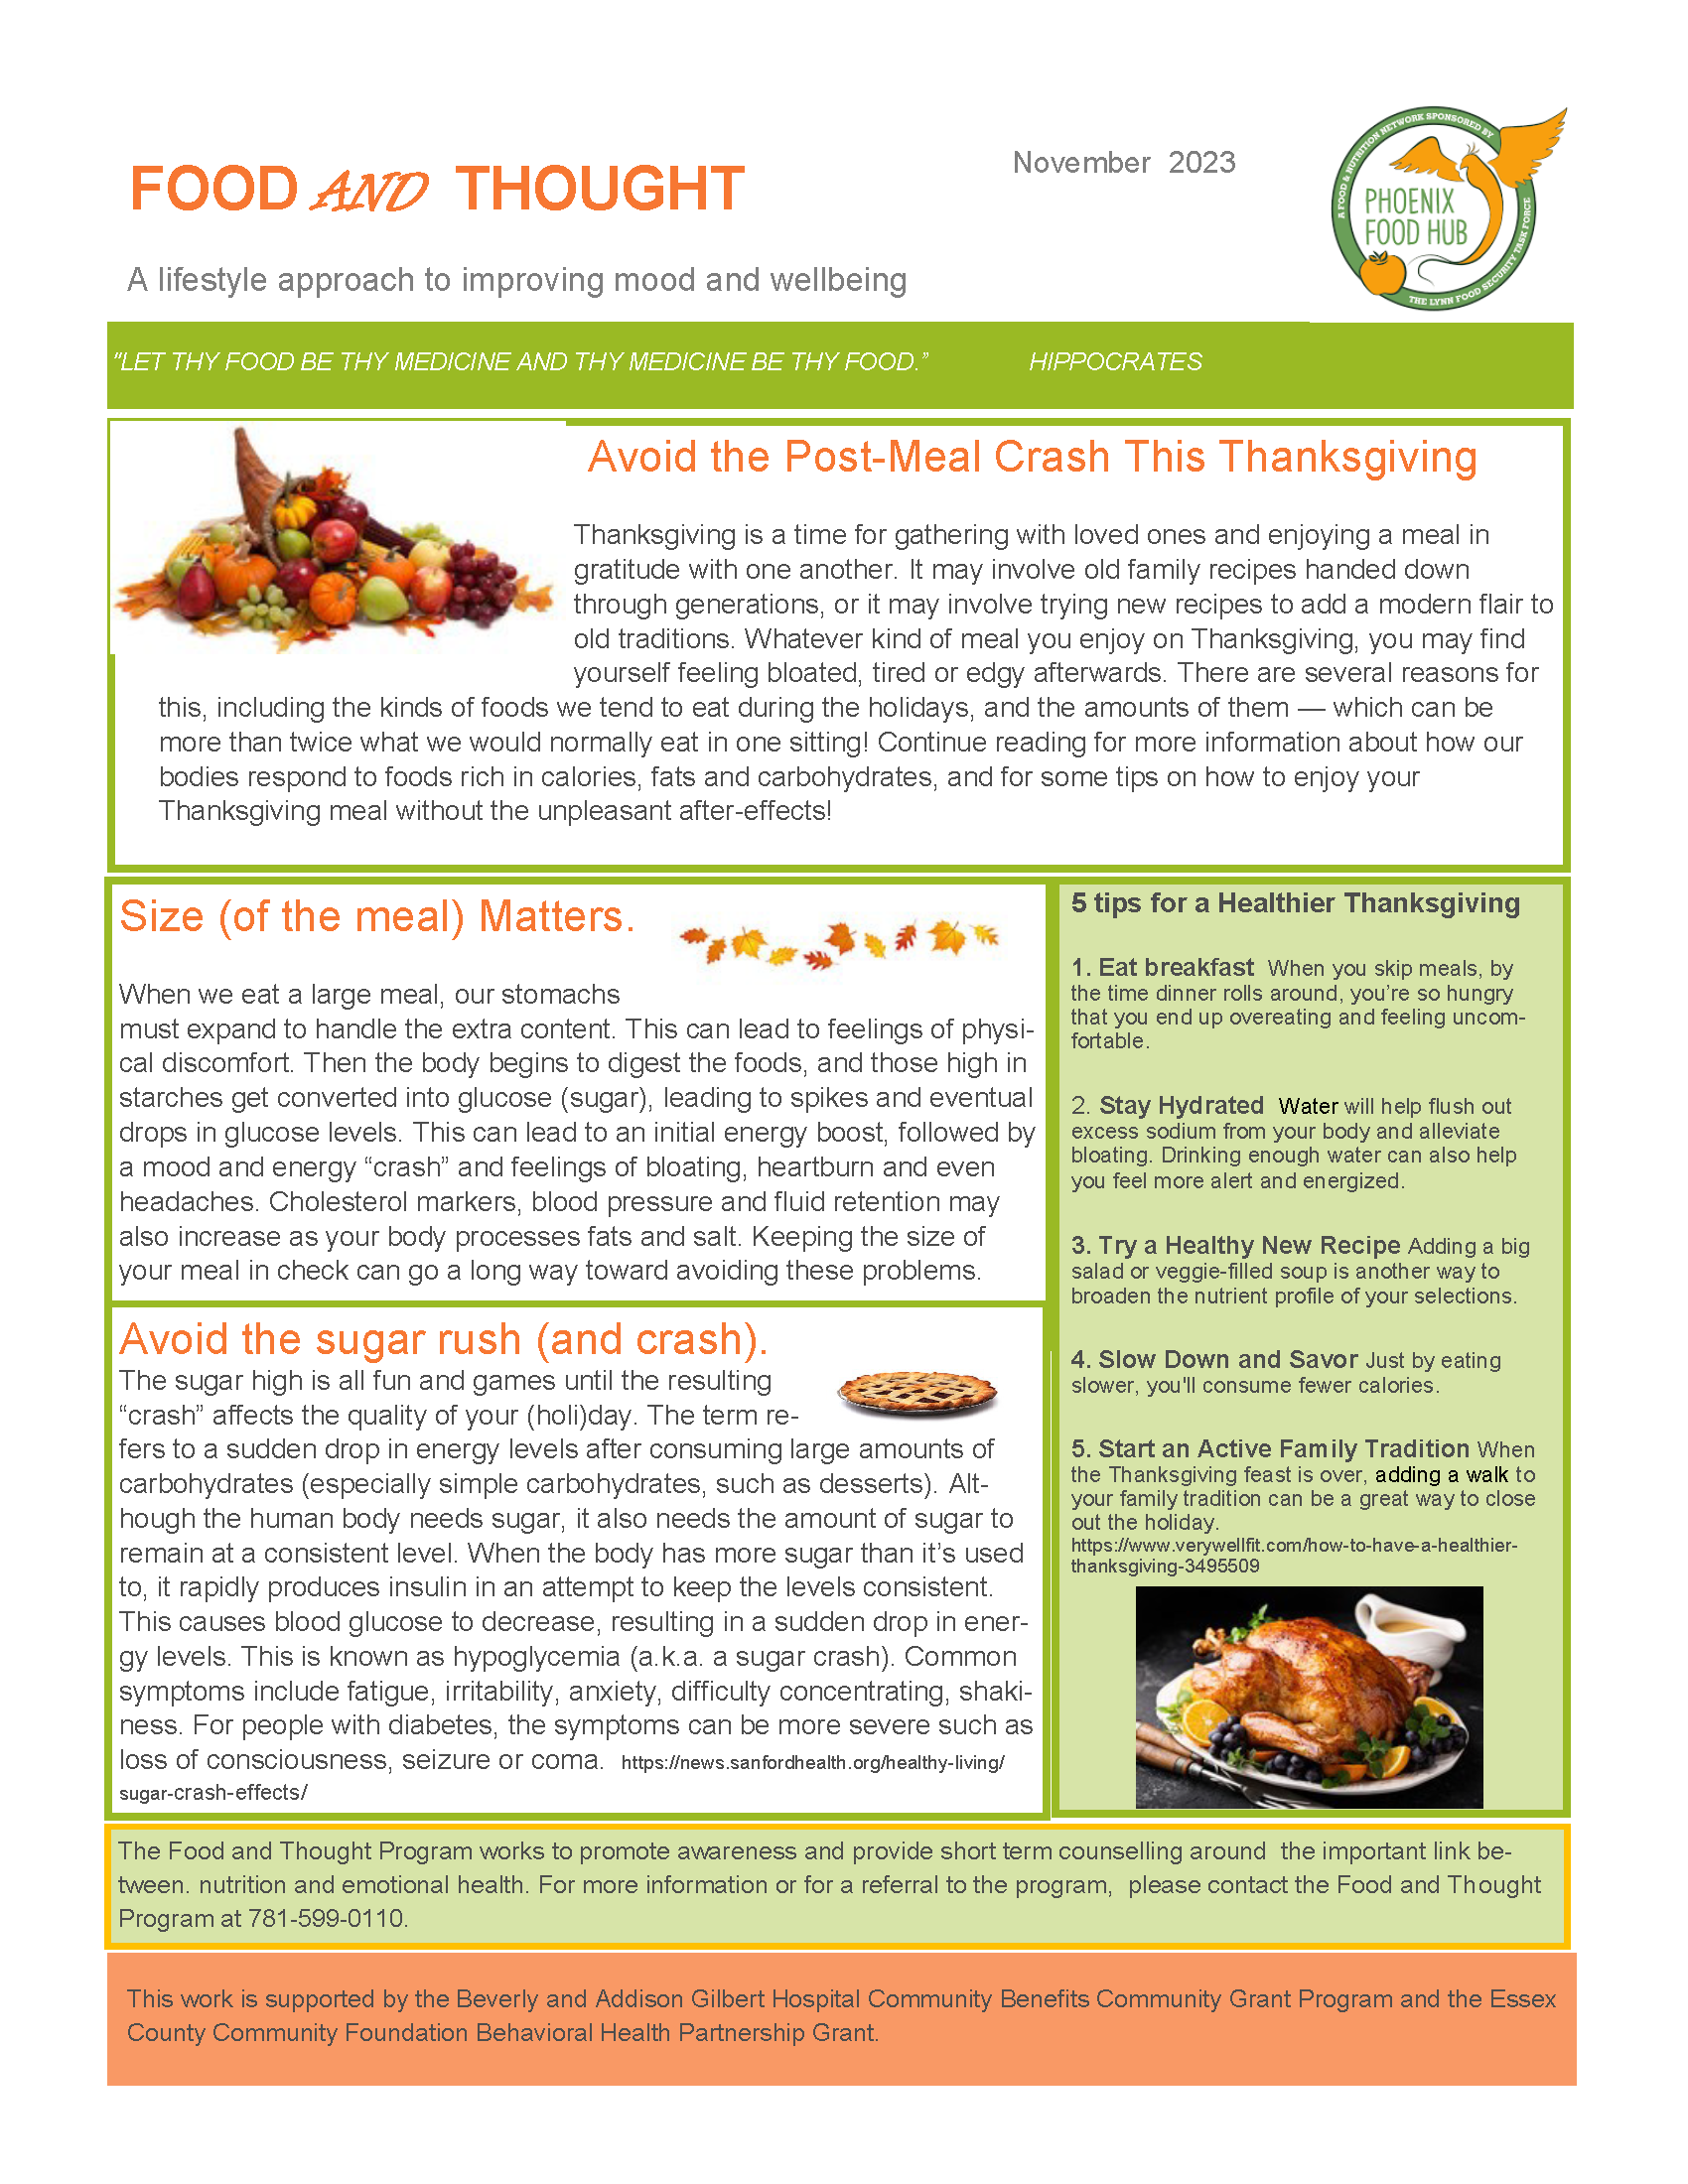 Food For Thought November 2023 Newsletter English.png